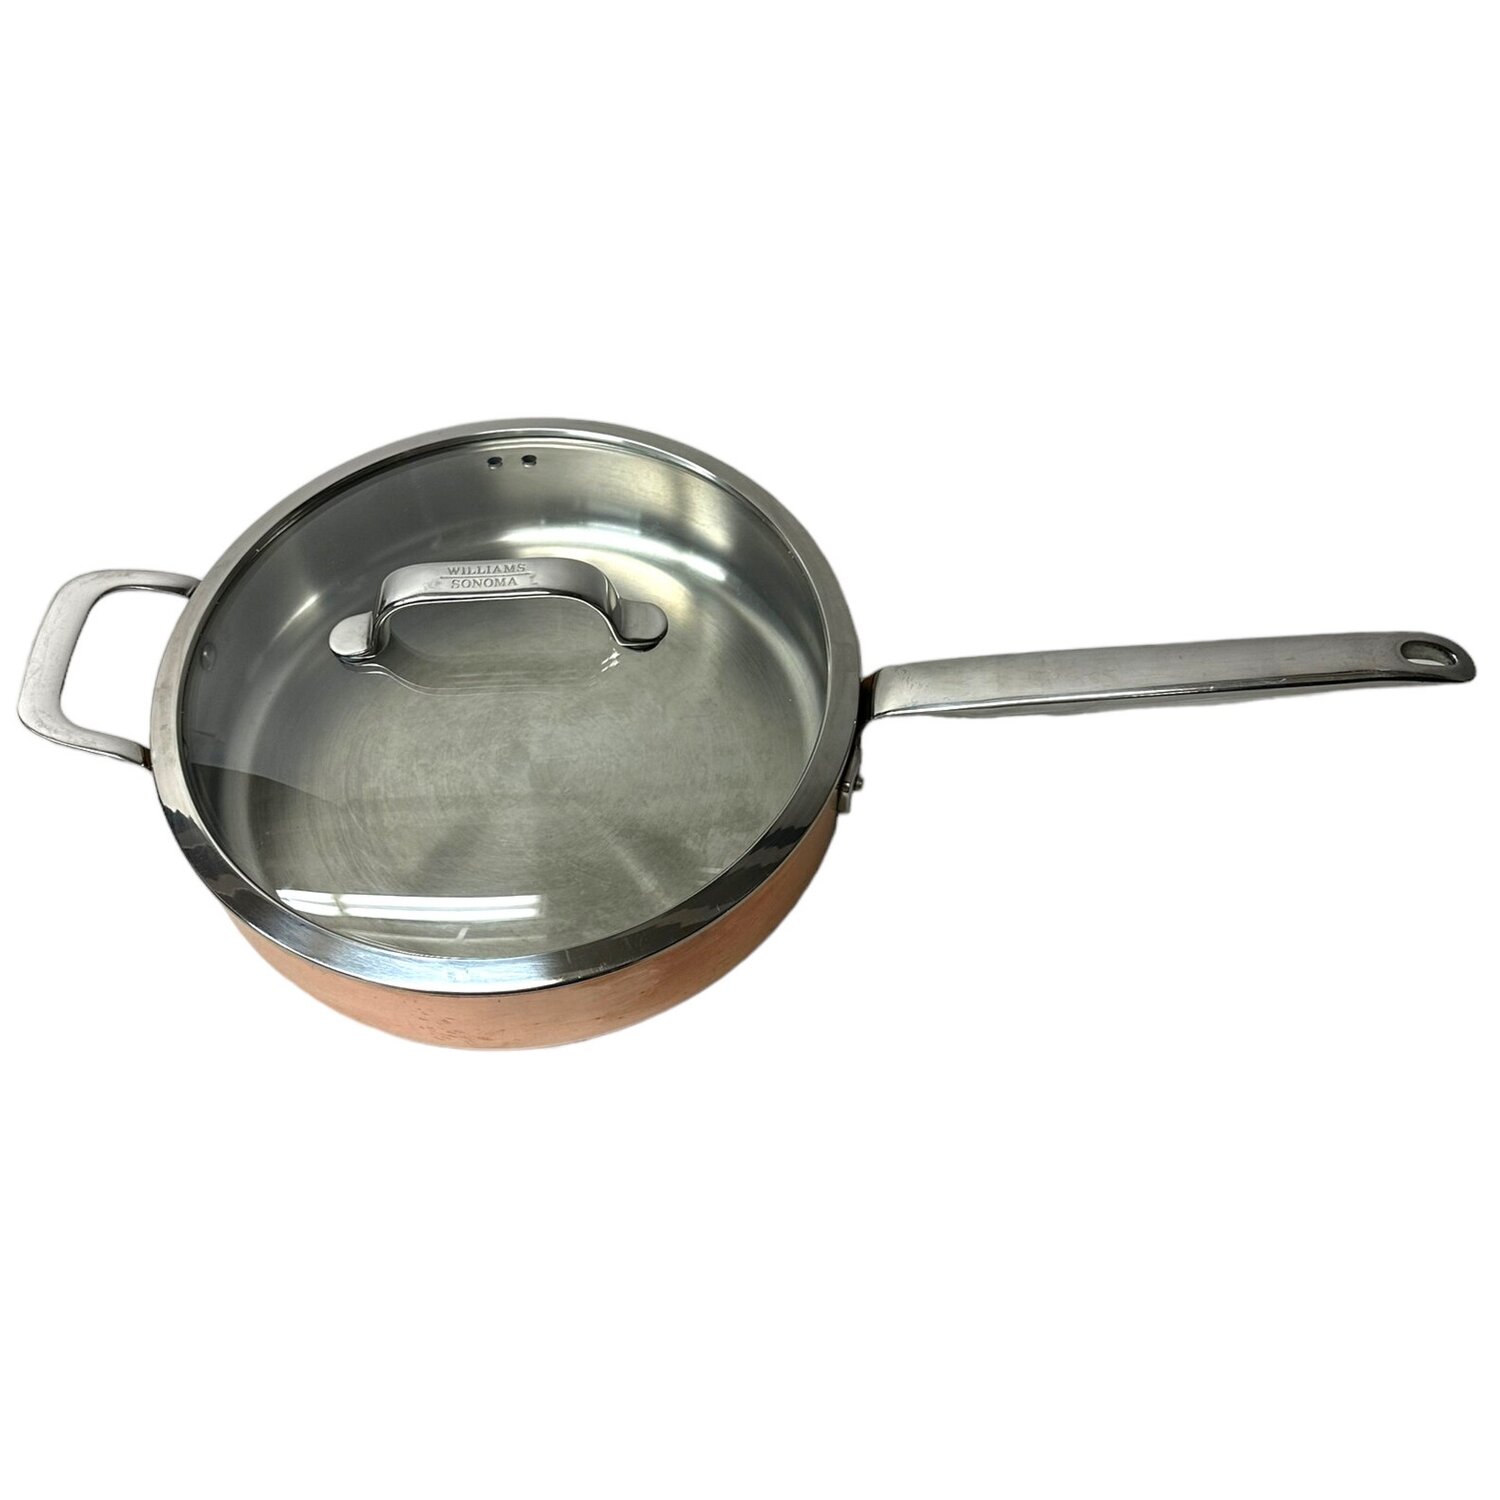 SPLAYED SAUTE PAN IN COPPER TIN EXTRA THICK WITH BRONZE HANDLE